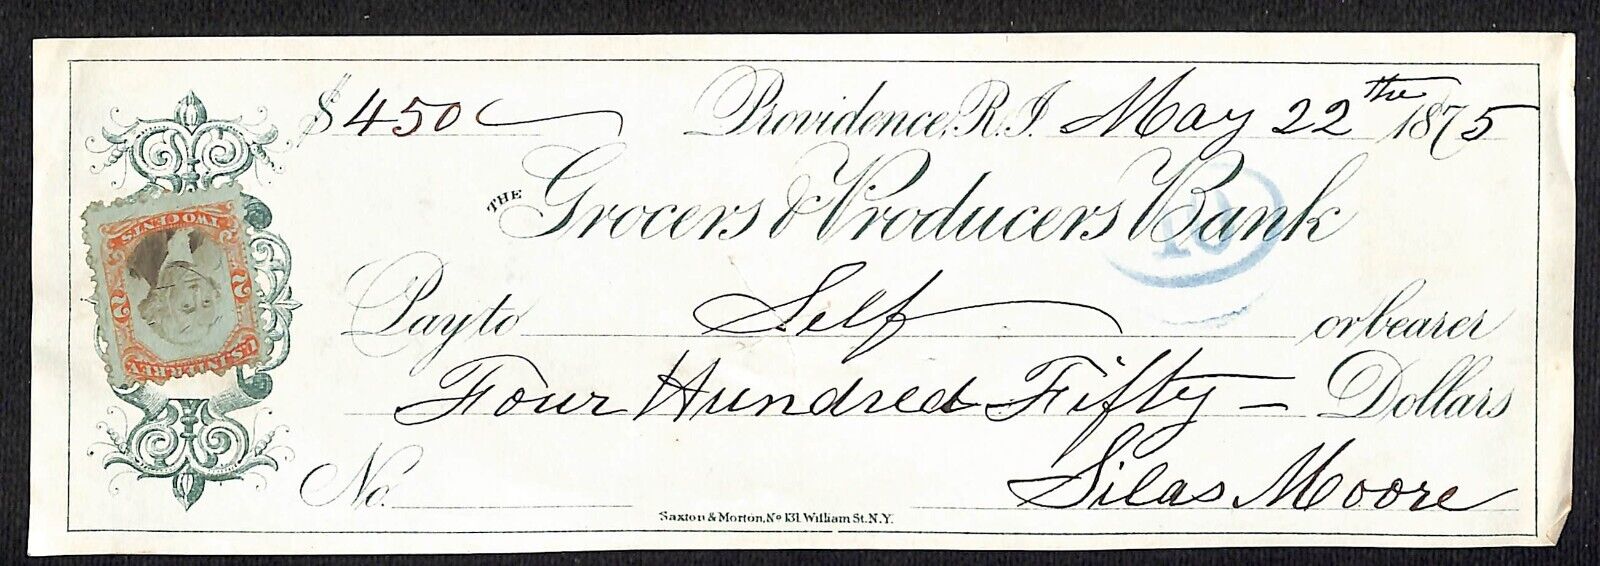 Grocers & Producers Bank Providence RI 1875 $400 Silas Moore Bank Check - Scarce